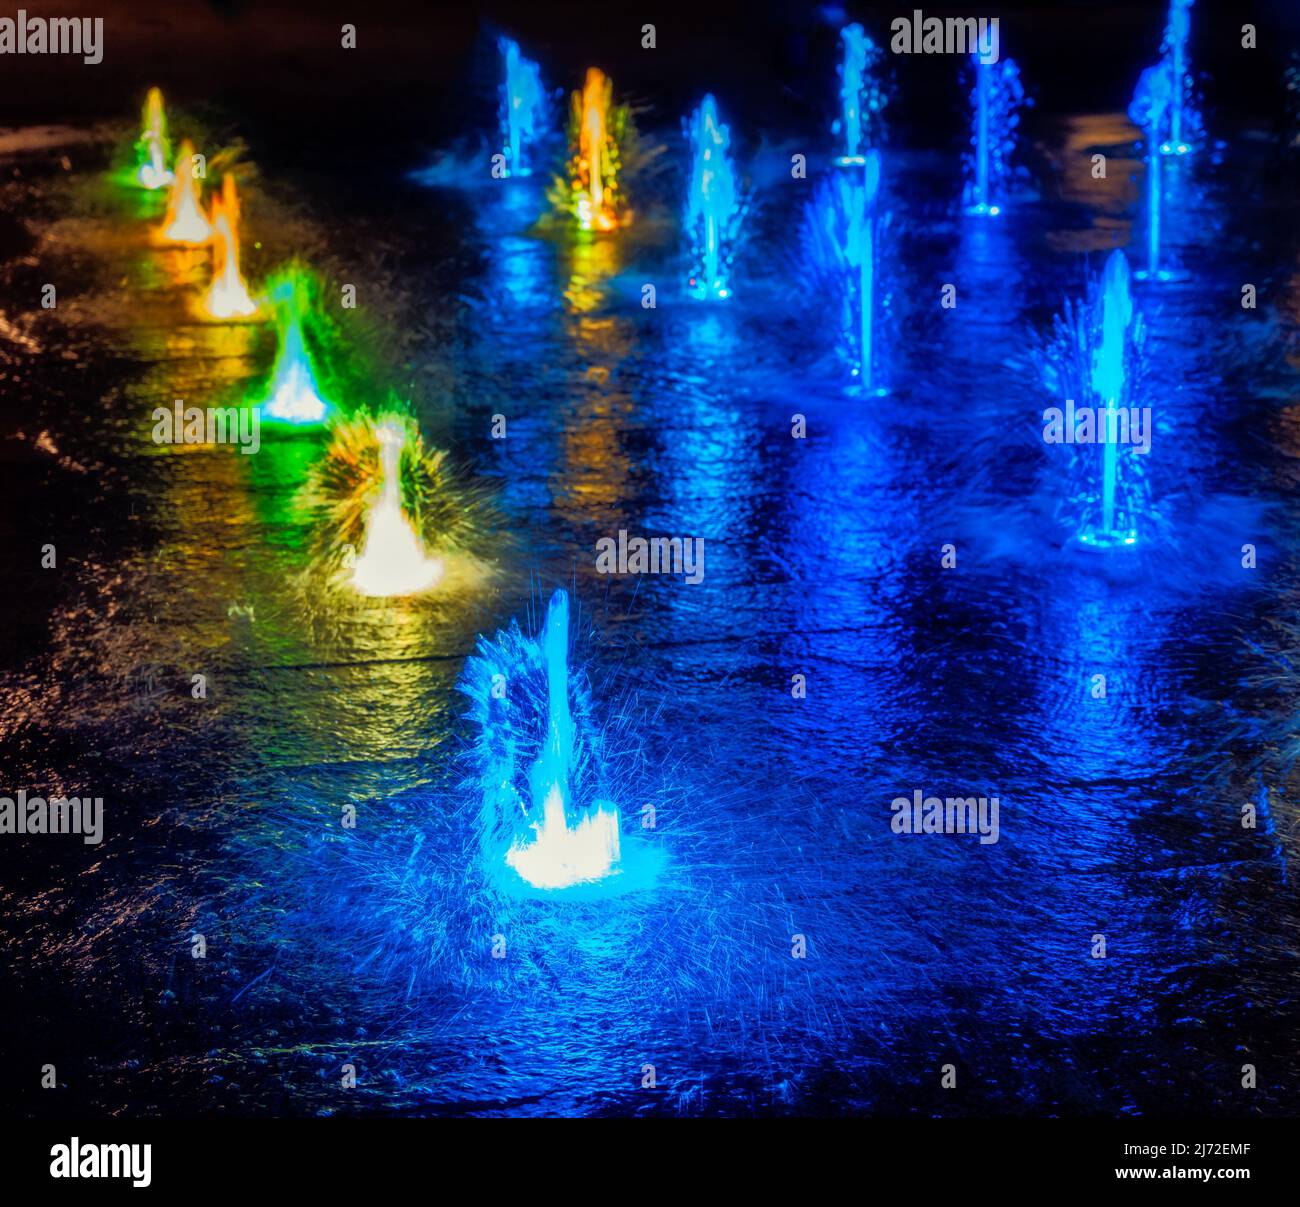 Colourful illuminated waterspout fountain at night Stock Photo